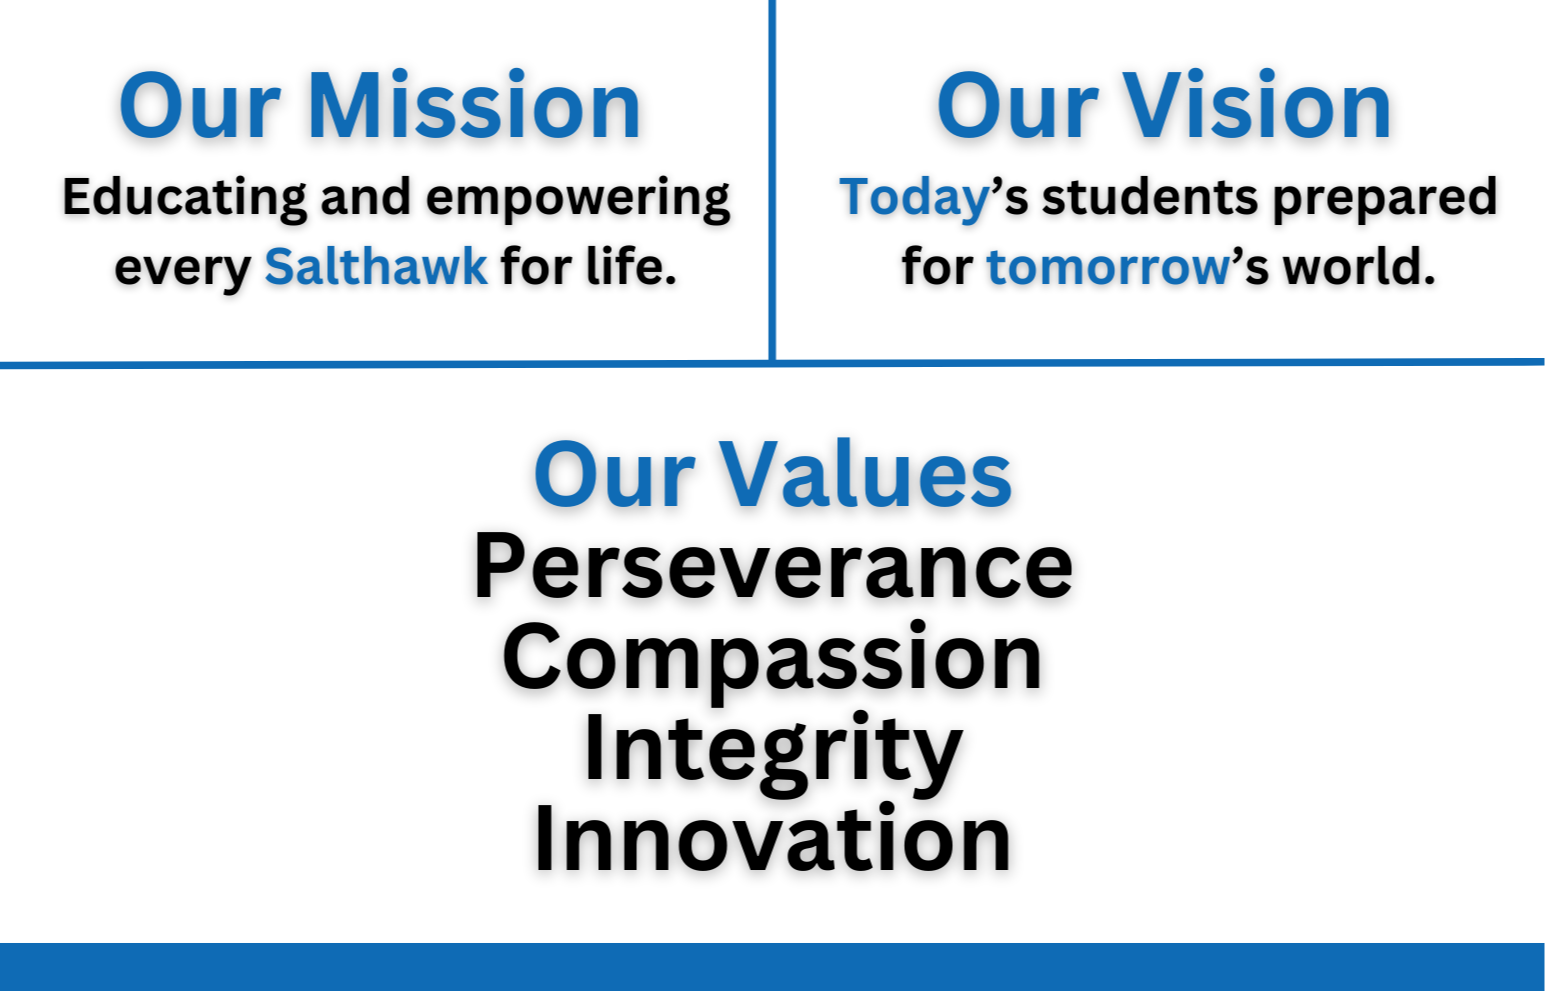 Our Mission: Educating and empowering every Salthawk for life. Our Vision: Today's students prepared for tomorrow's world. our values: perseverance, compassion, integrity, innovation. 